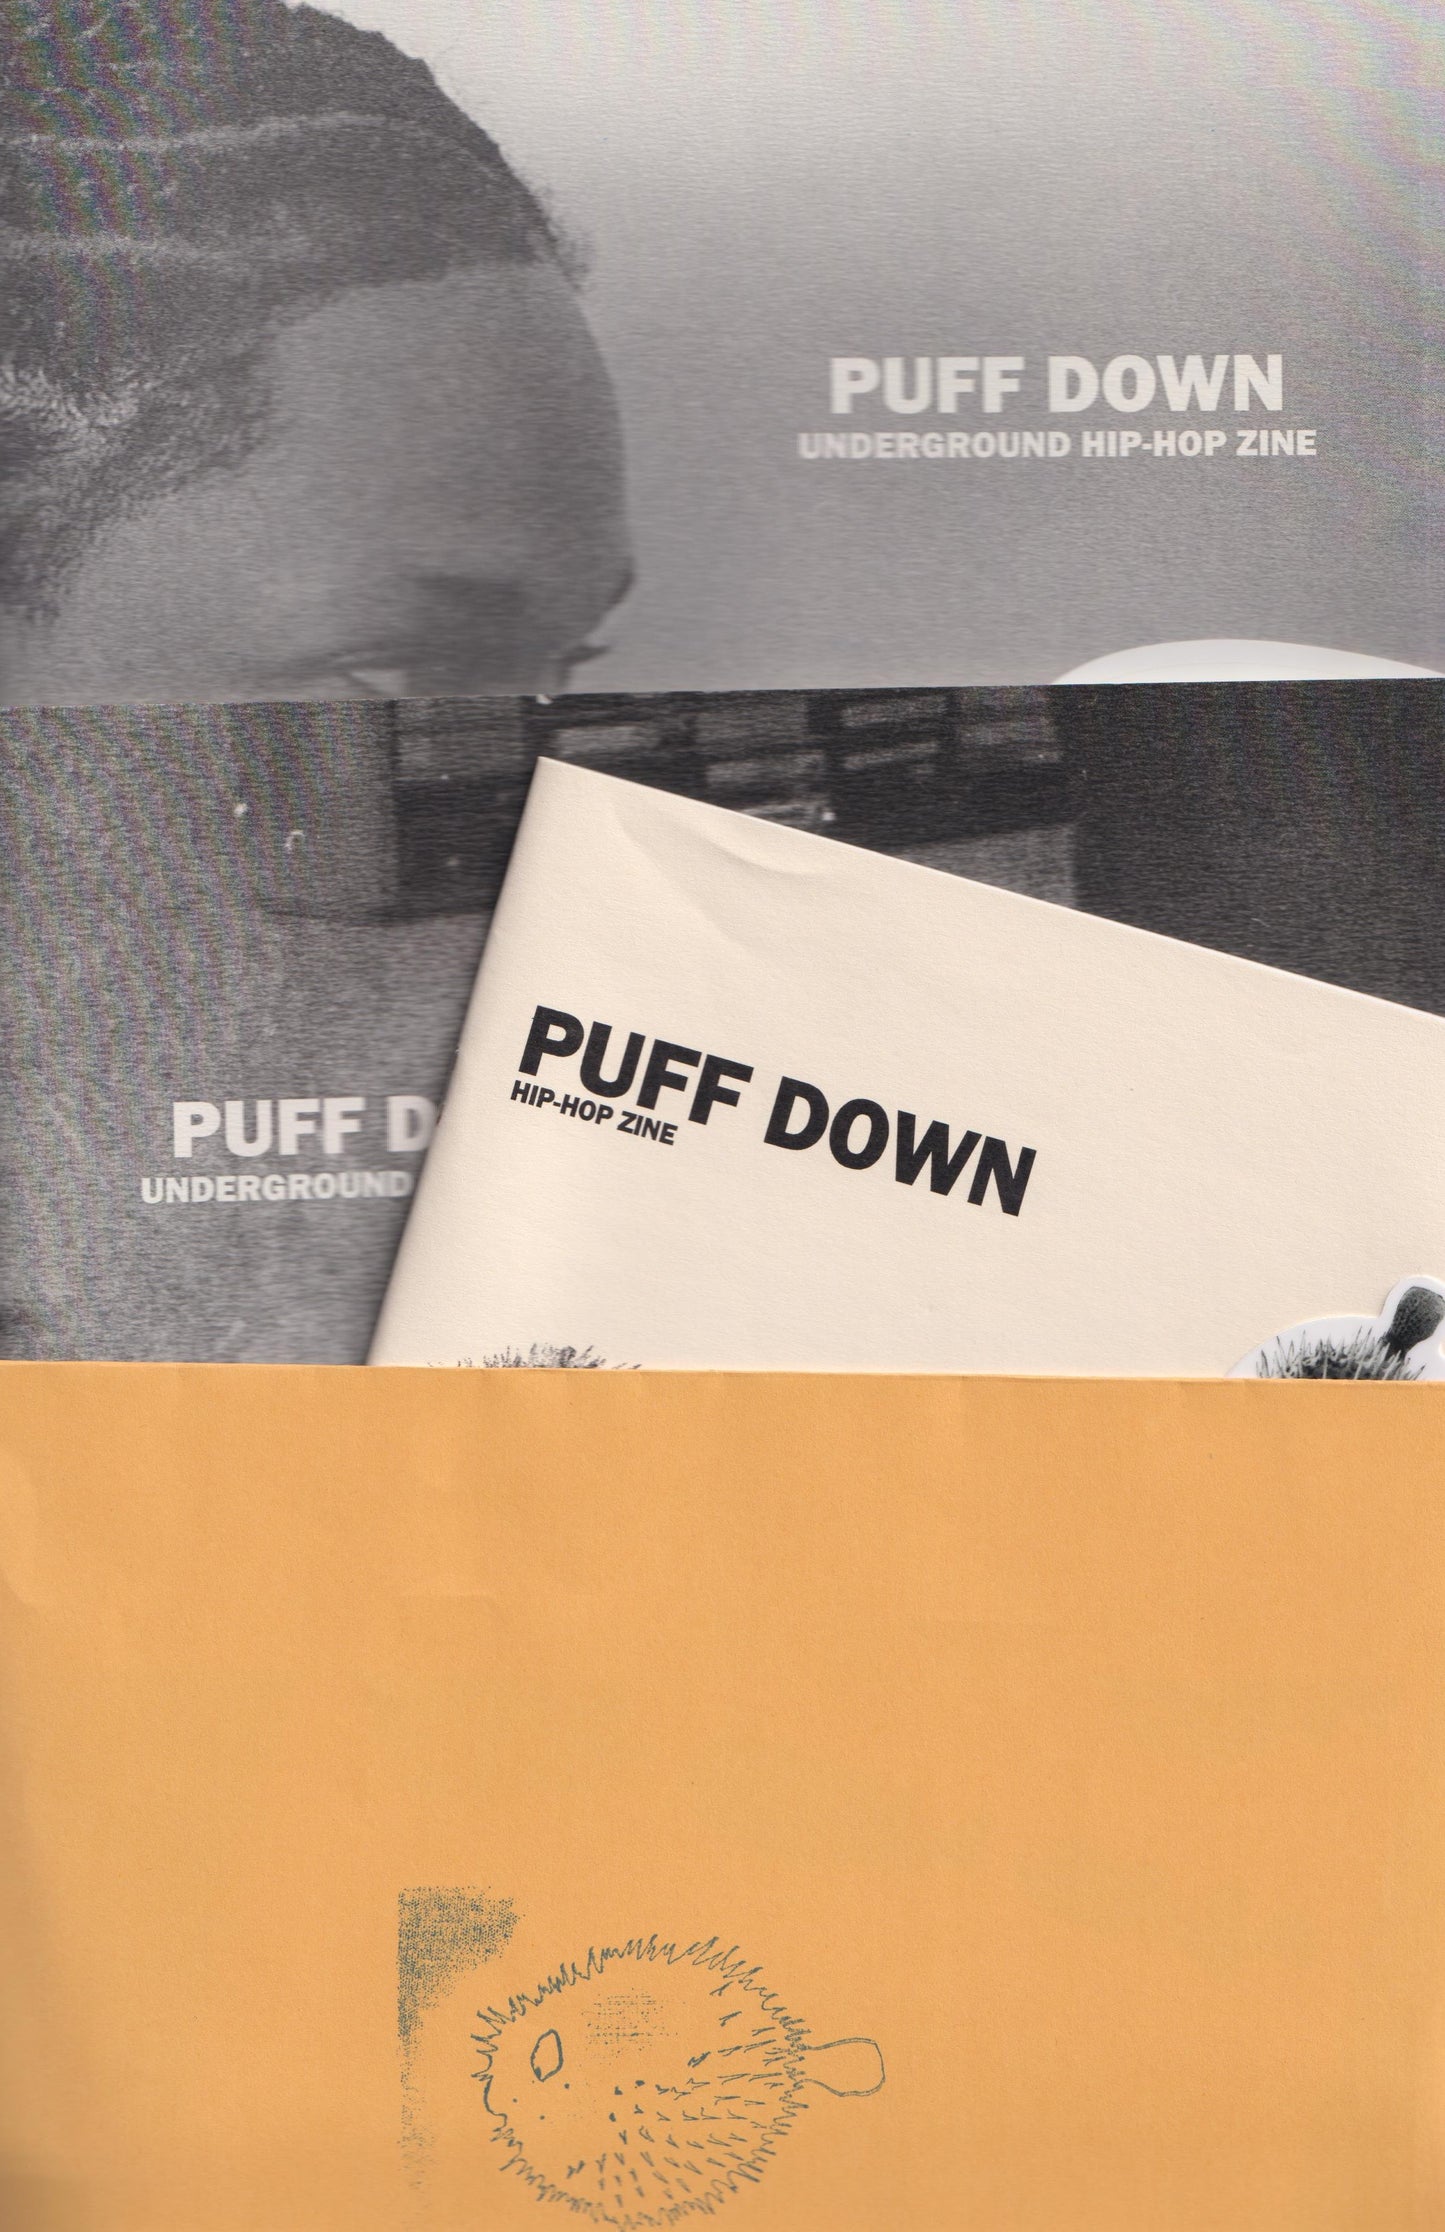 PUFF DOWN PACK [UNDERGROUND HIP-HOP] - “ISSUES 1, 2 & 3 COMBO” ZINE